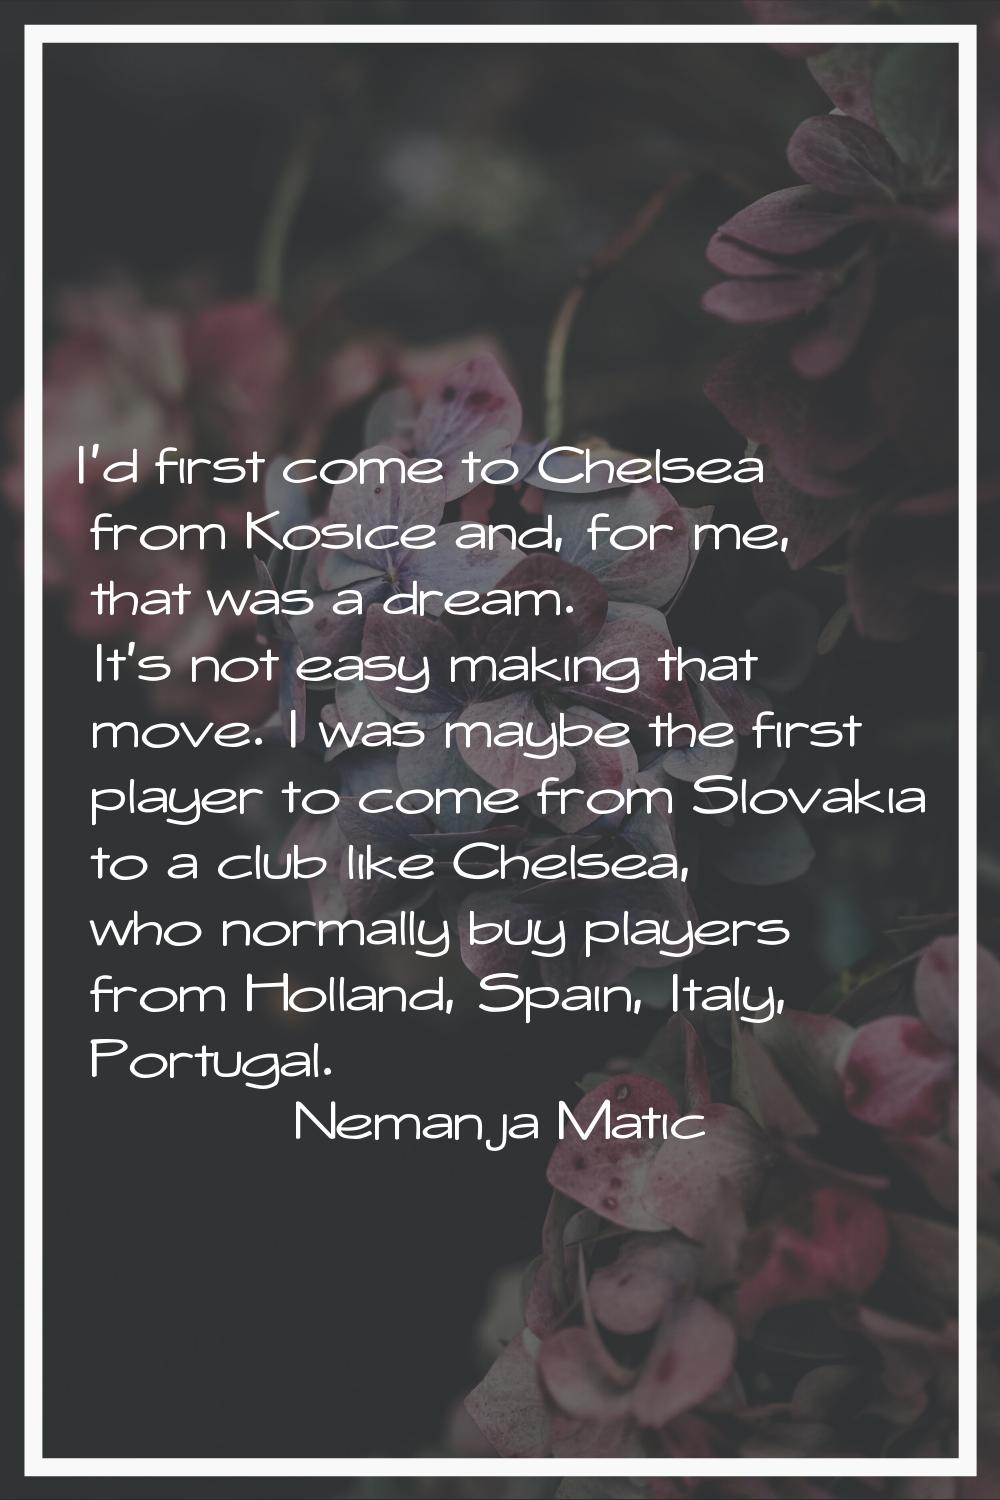 I'd first come to Chelsea from Kosice and, for me, that was a dream. It's not easy making that move